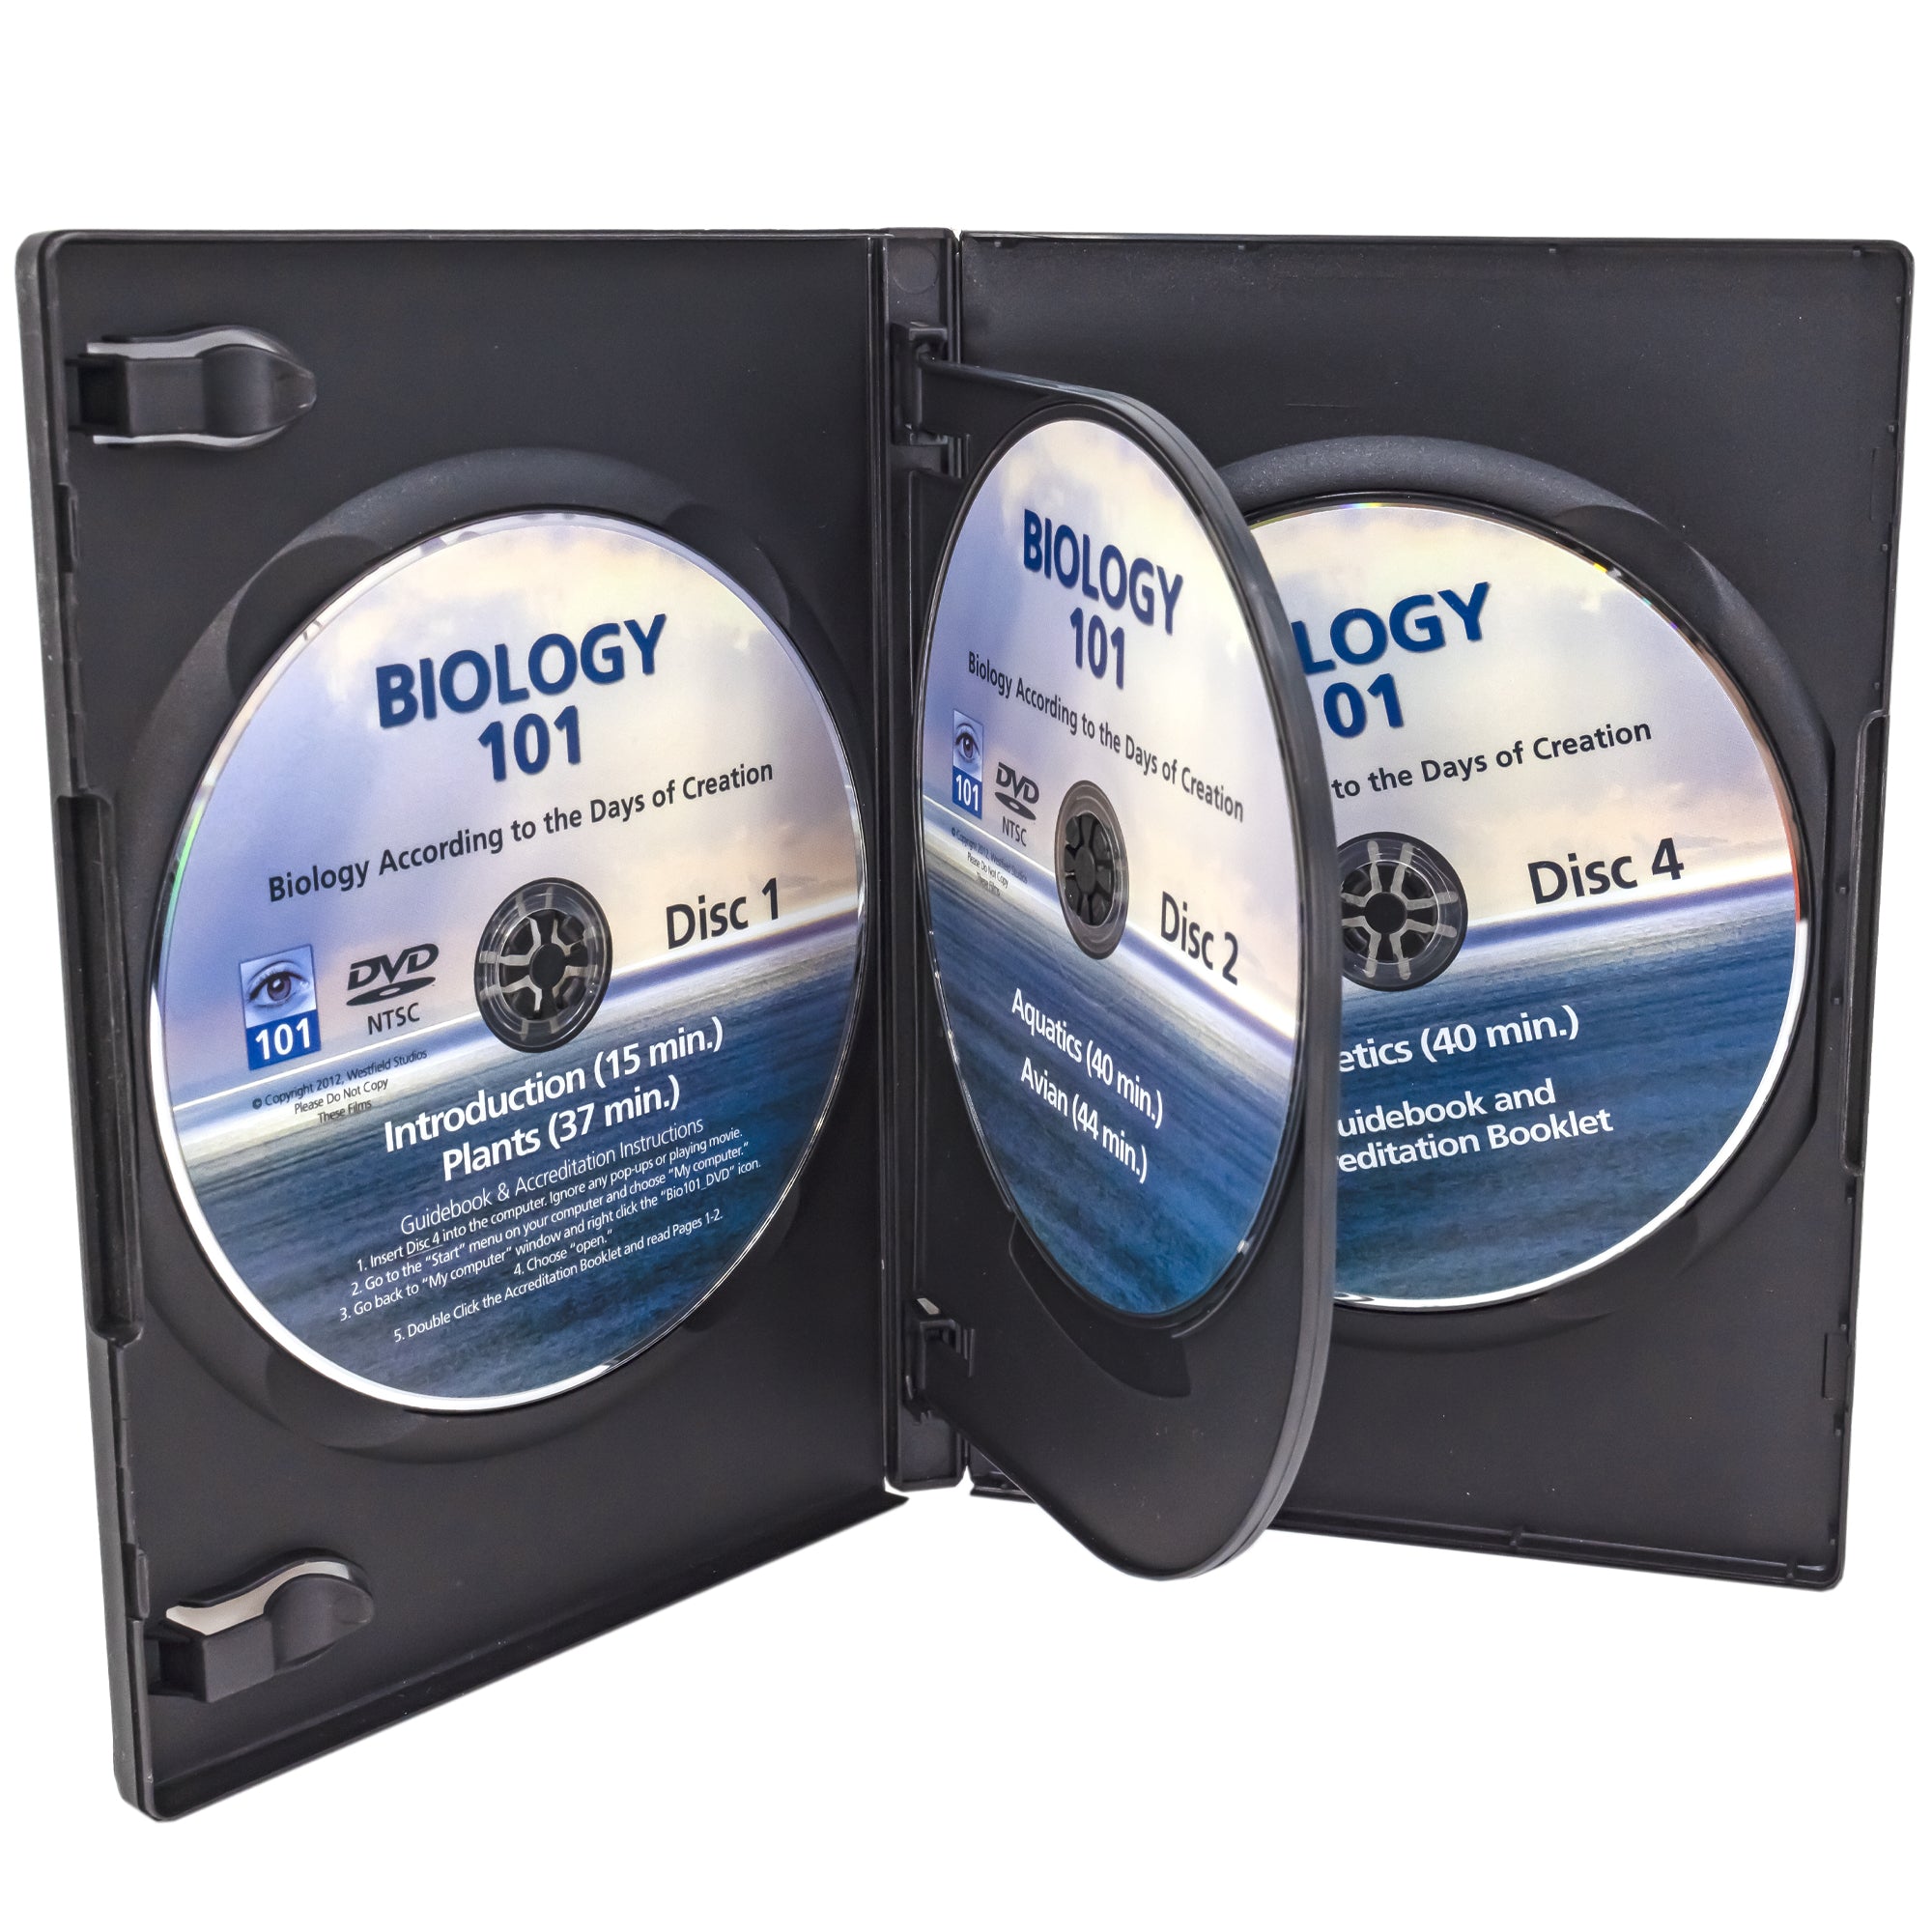 Biology 101 DVD case open to show the discs inside. There are 2 discs on the walls of the case, and 2 attached to an insert in the middle of the case.